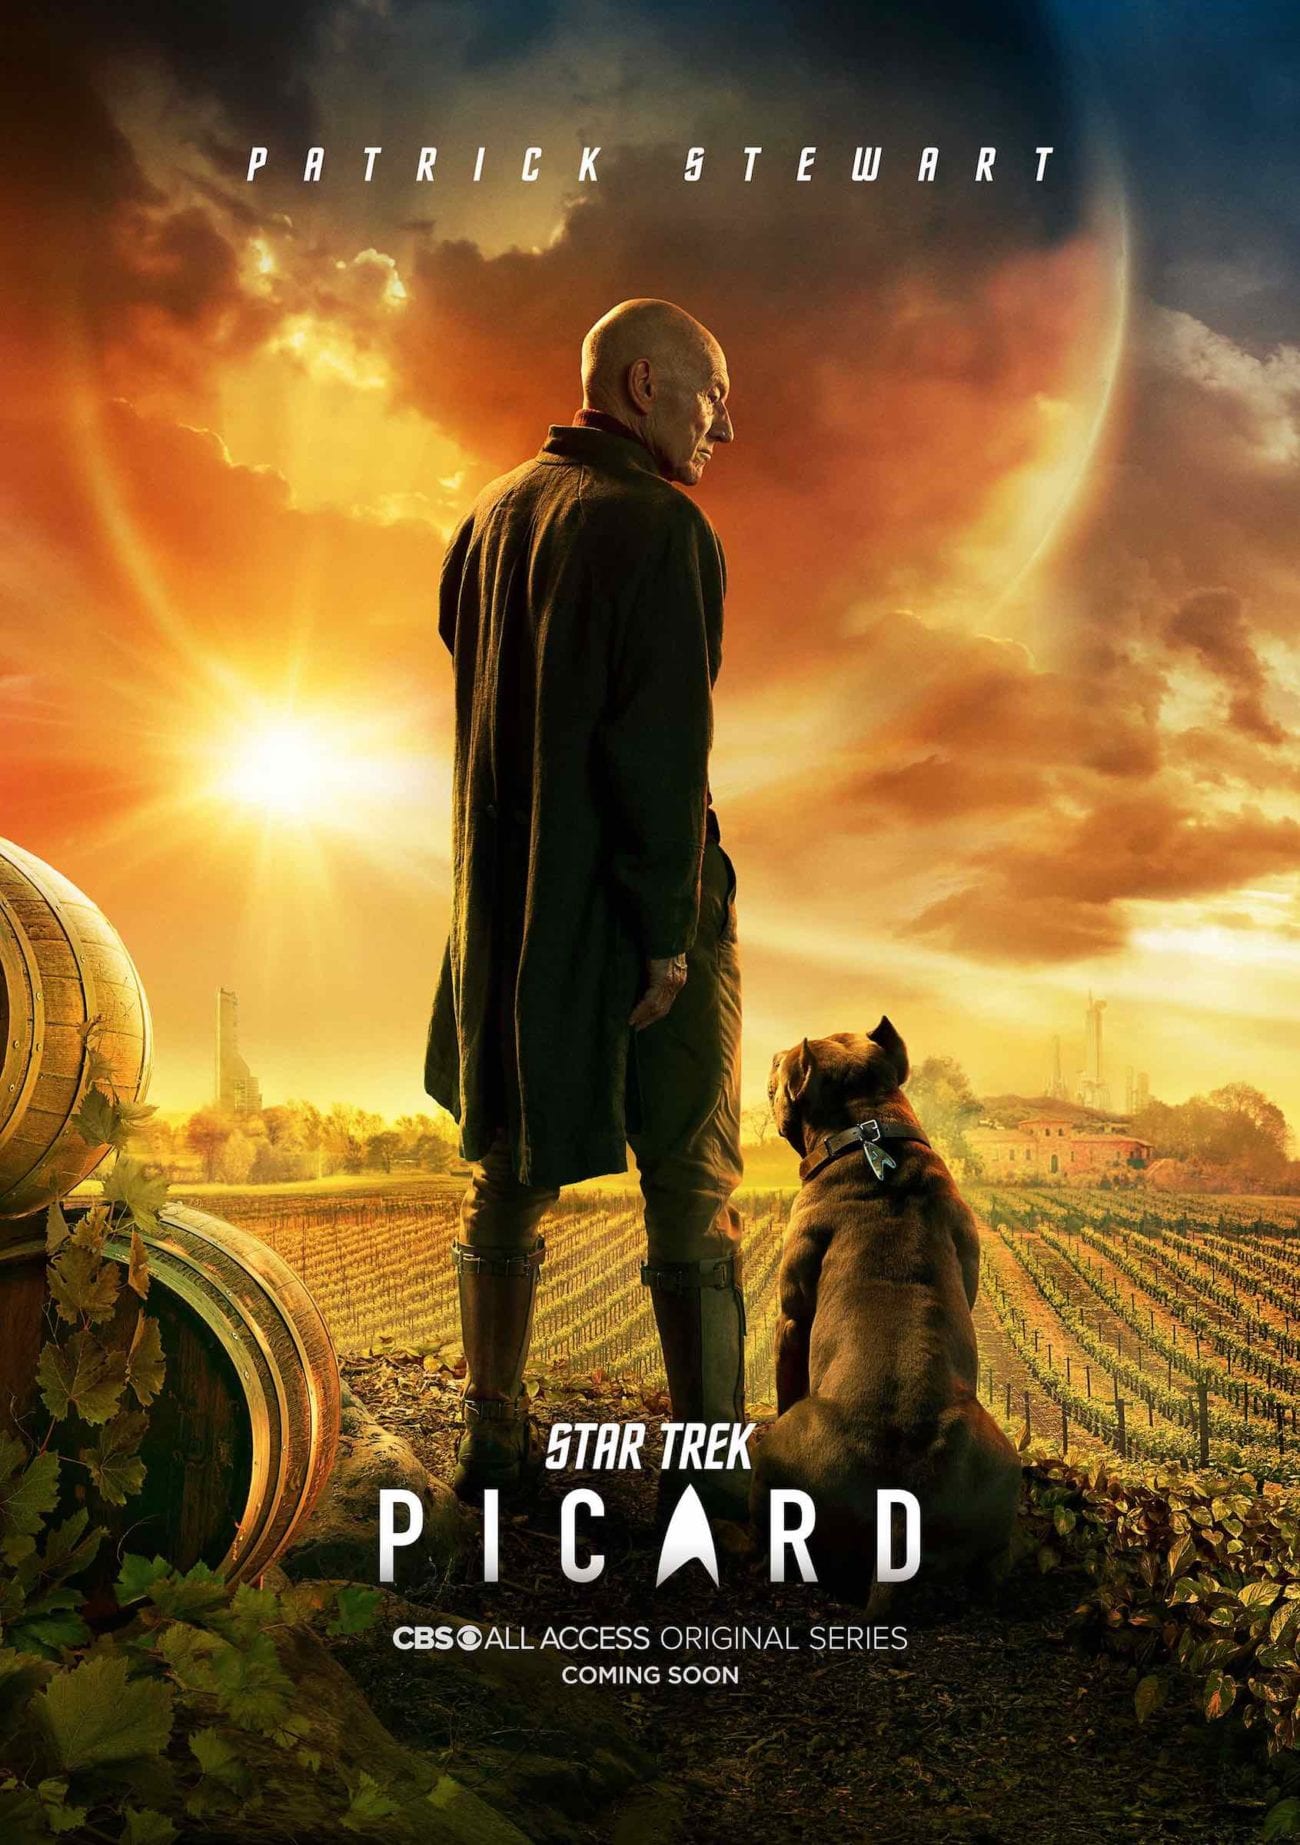 We came up with a few things 'Star Trek: Picard' could borrow from its predecessors to thrill us, 'Star Trek: The Next Generation'.